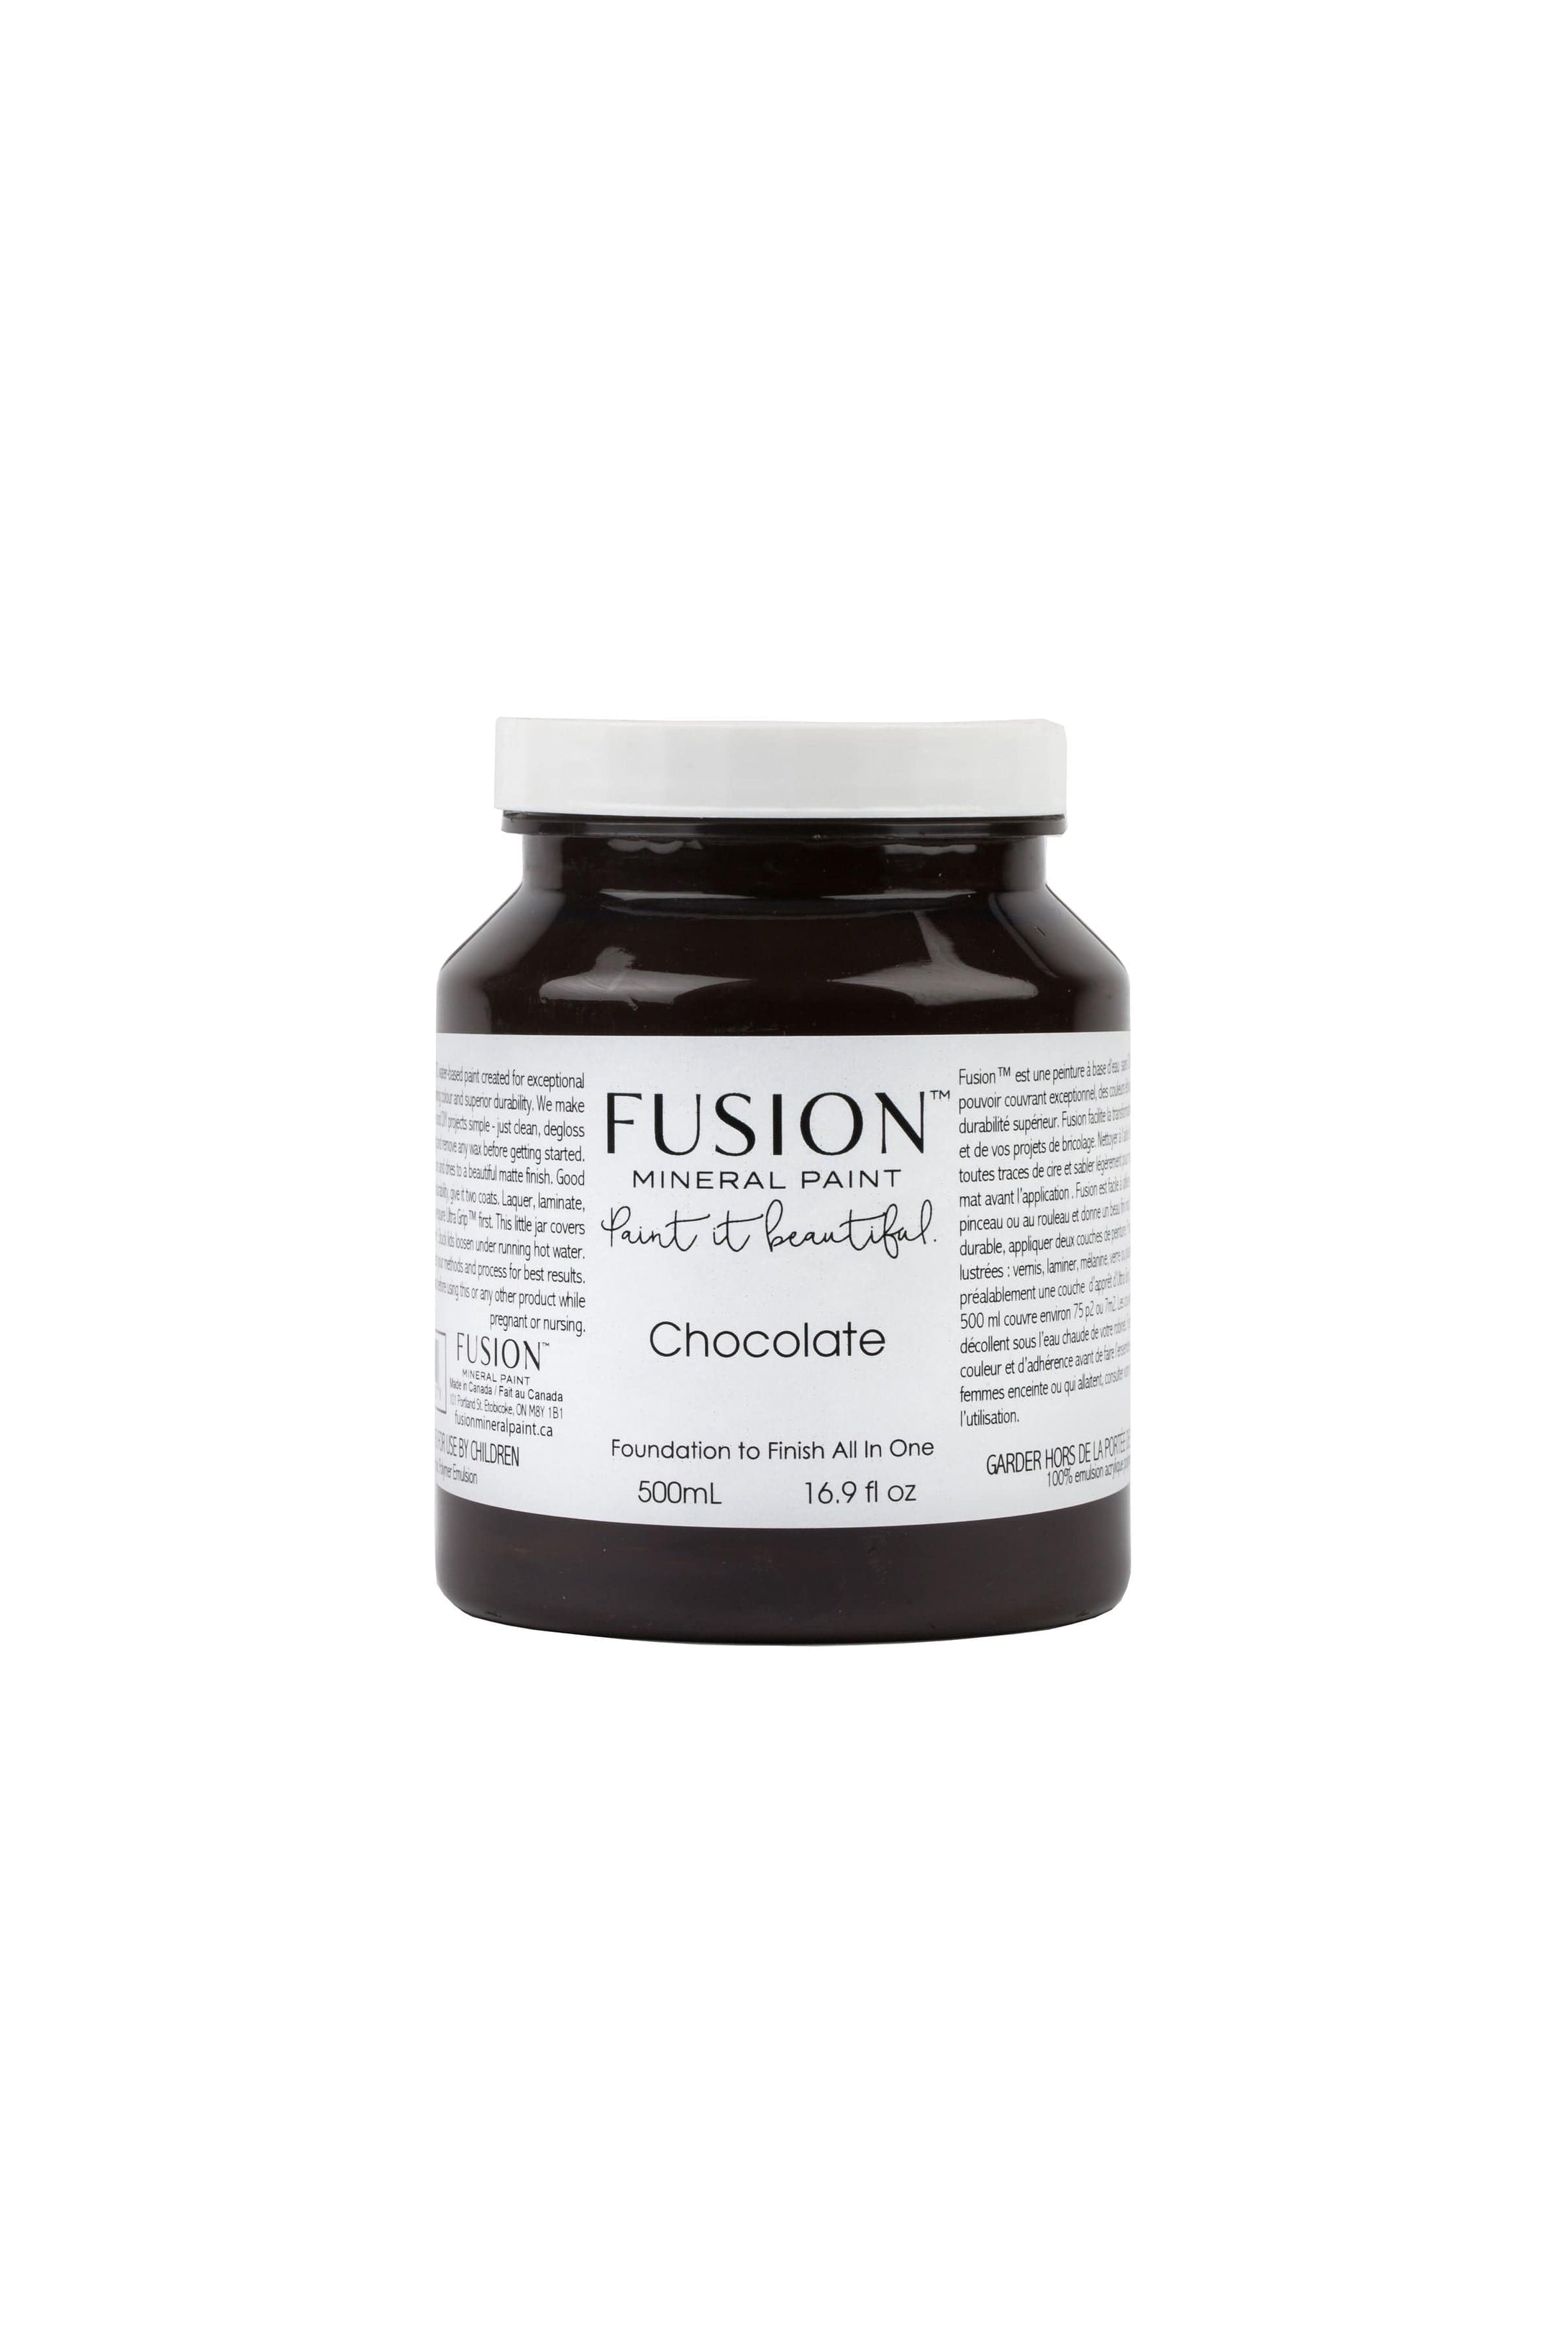 Fusion Fusion Mineral Paint Pint 500mil or 16.9oz Fusion Mineral Paint - Chocolate